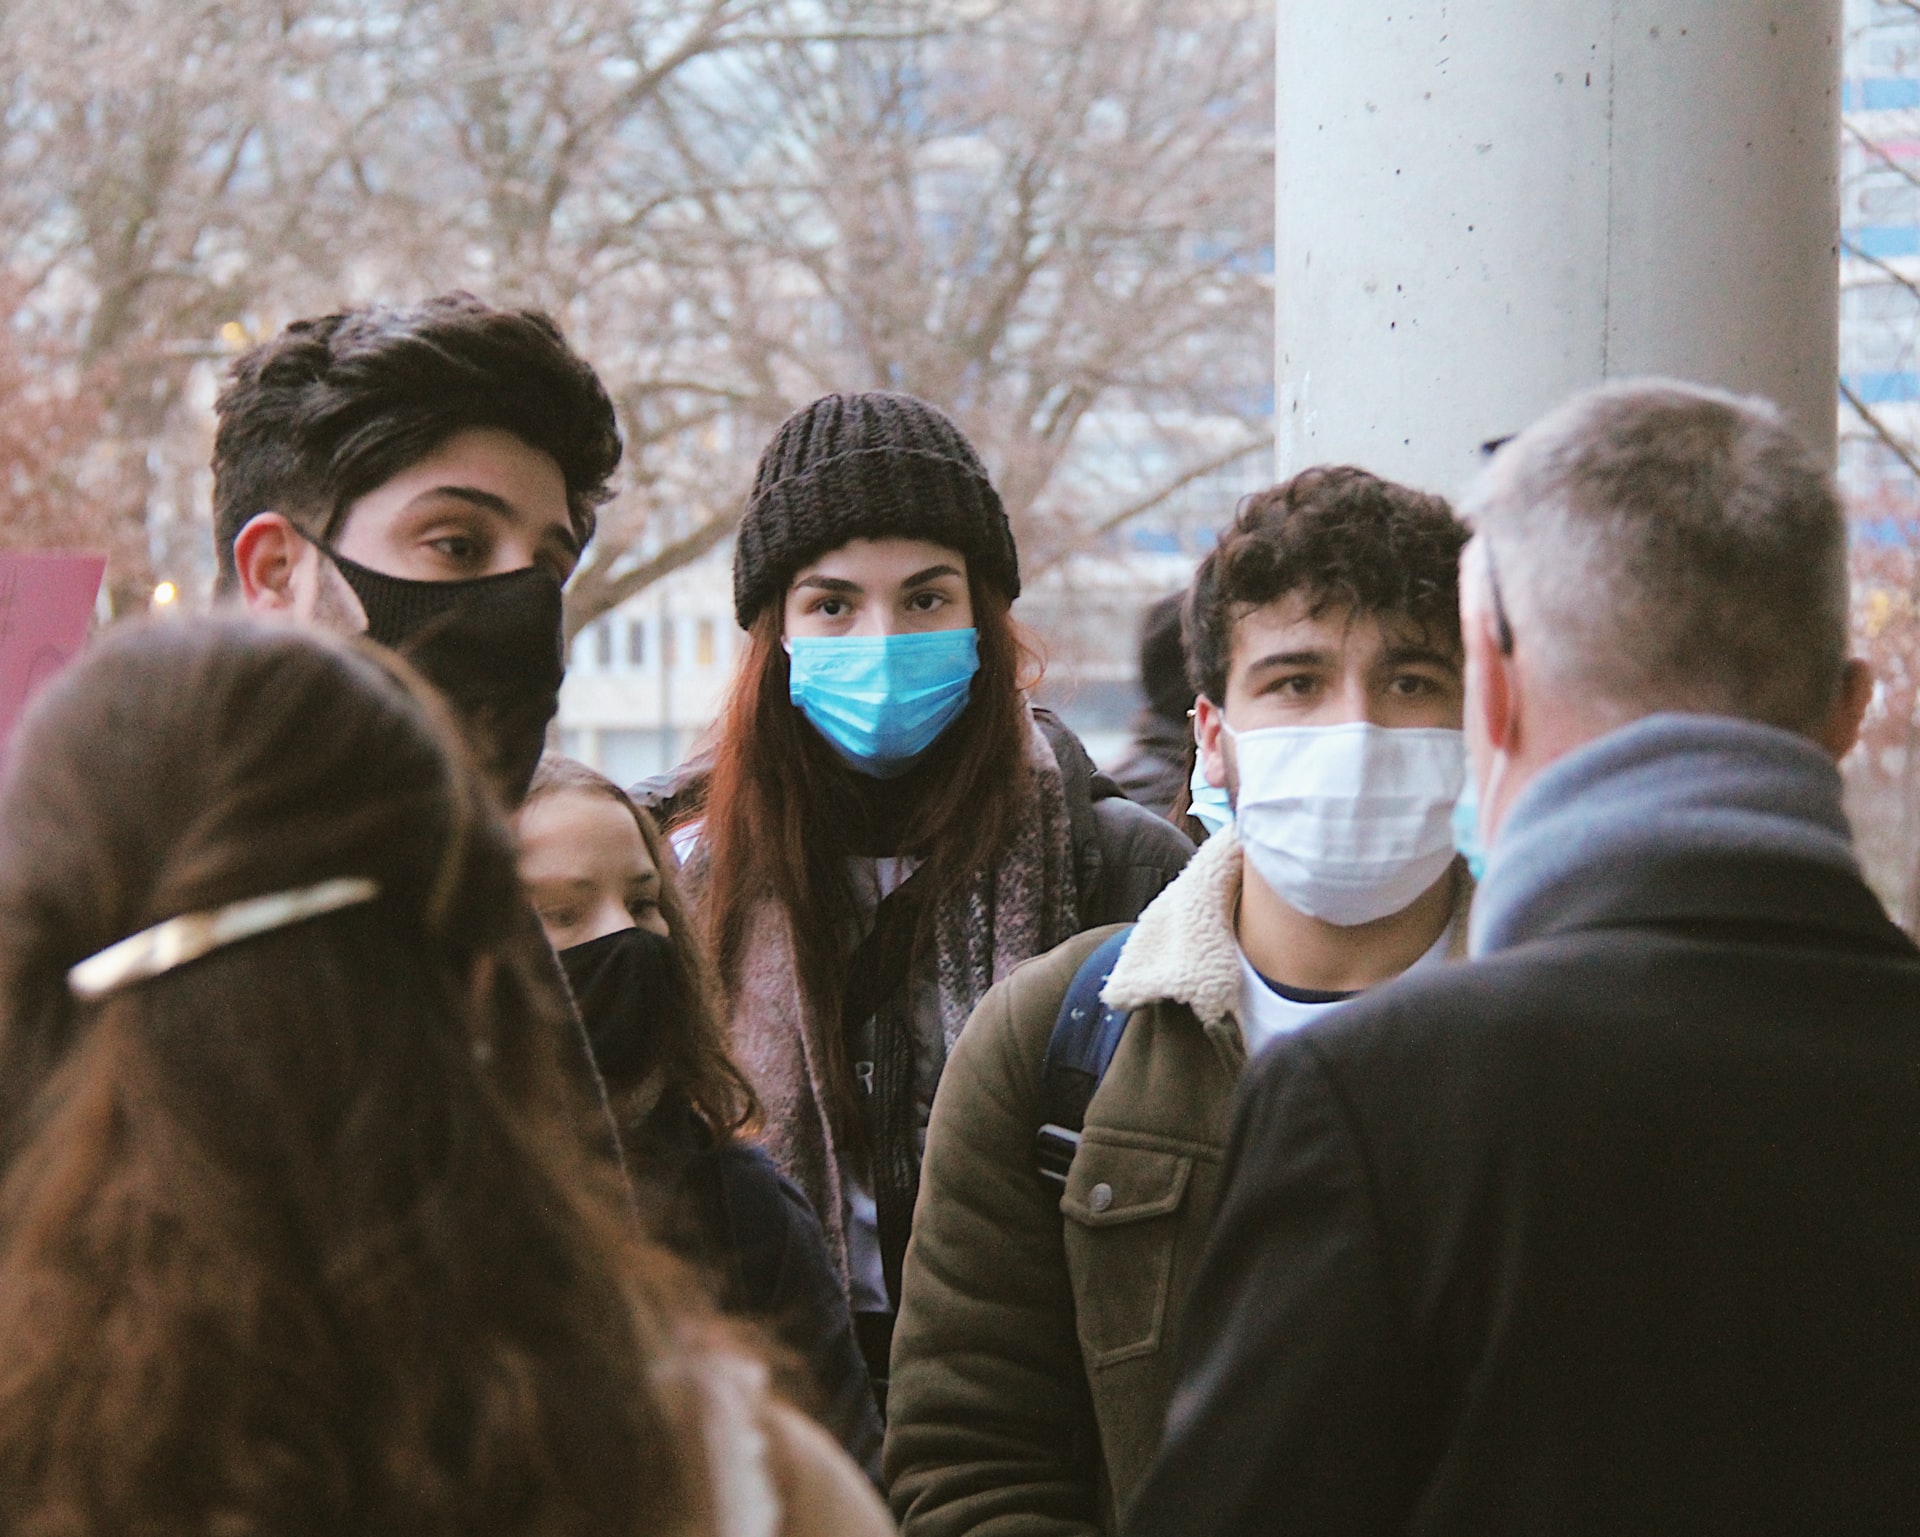 The latest 2021 report of the YAC project examines the impact of the pandemic on young people in Luxembourg, comparing the situation in 2020 and 2021, and sheds light on their vaccination willingness.